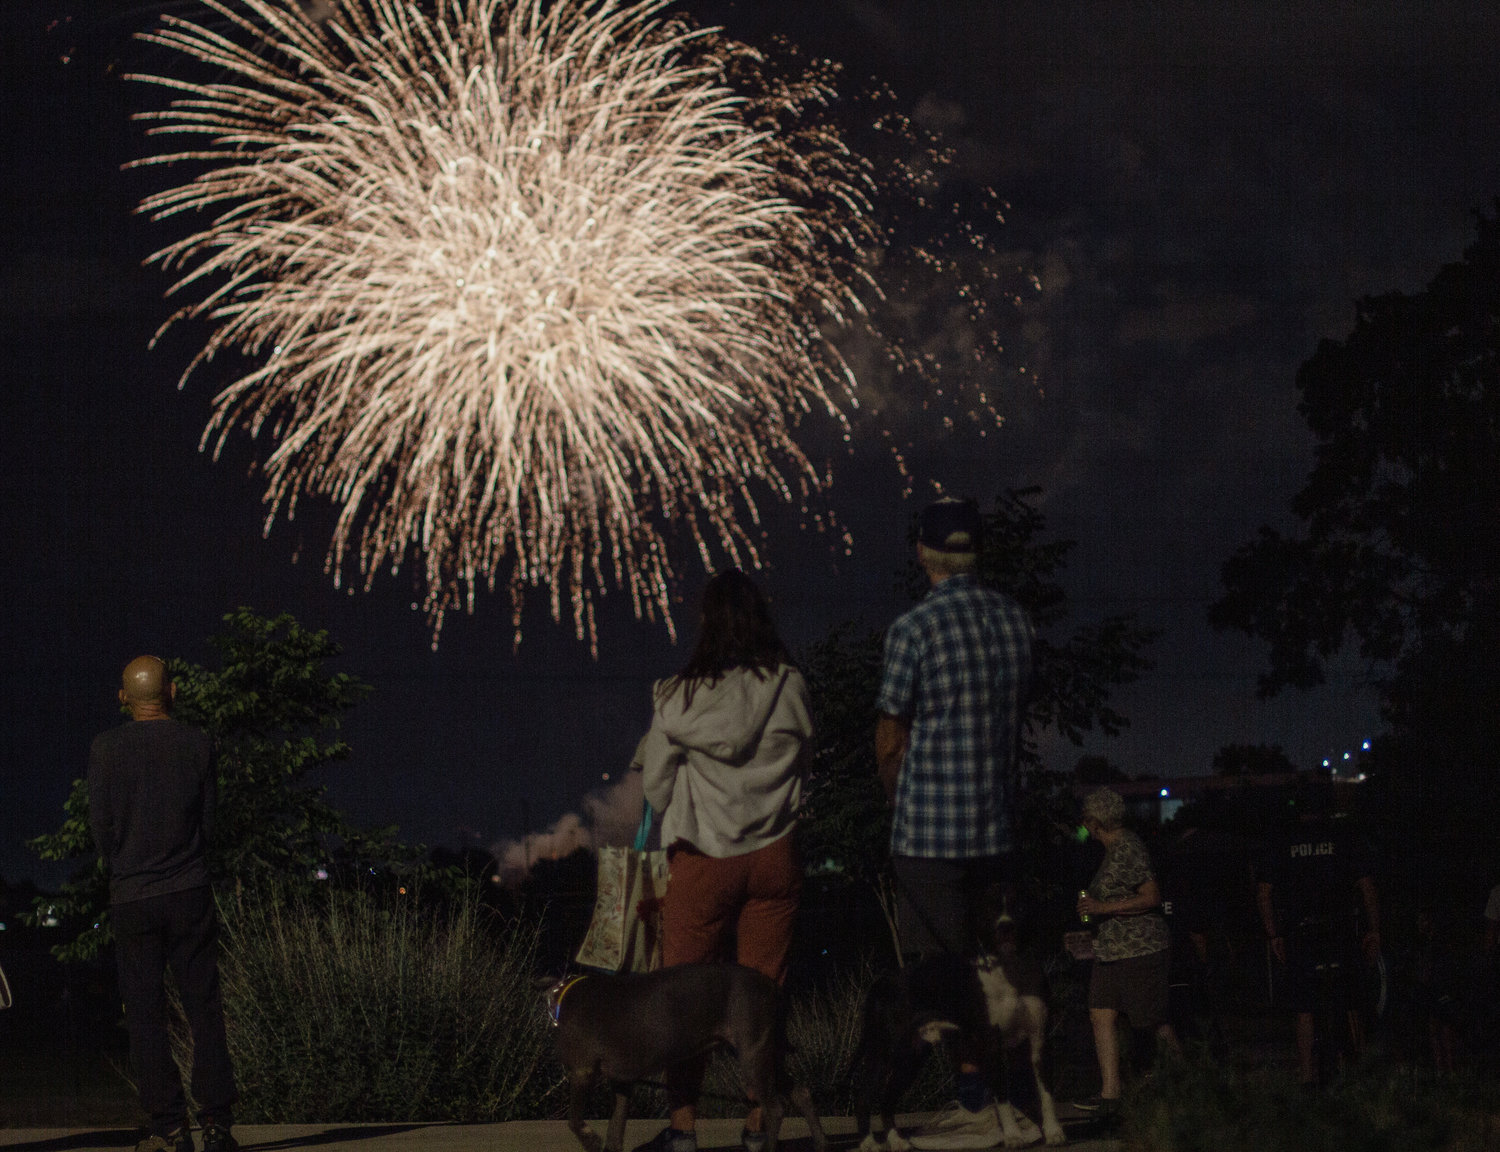 A crowd gathers to watch fireworks in Arvada on July 4.